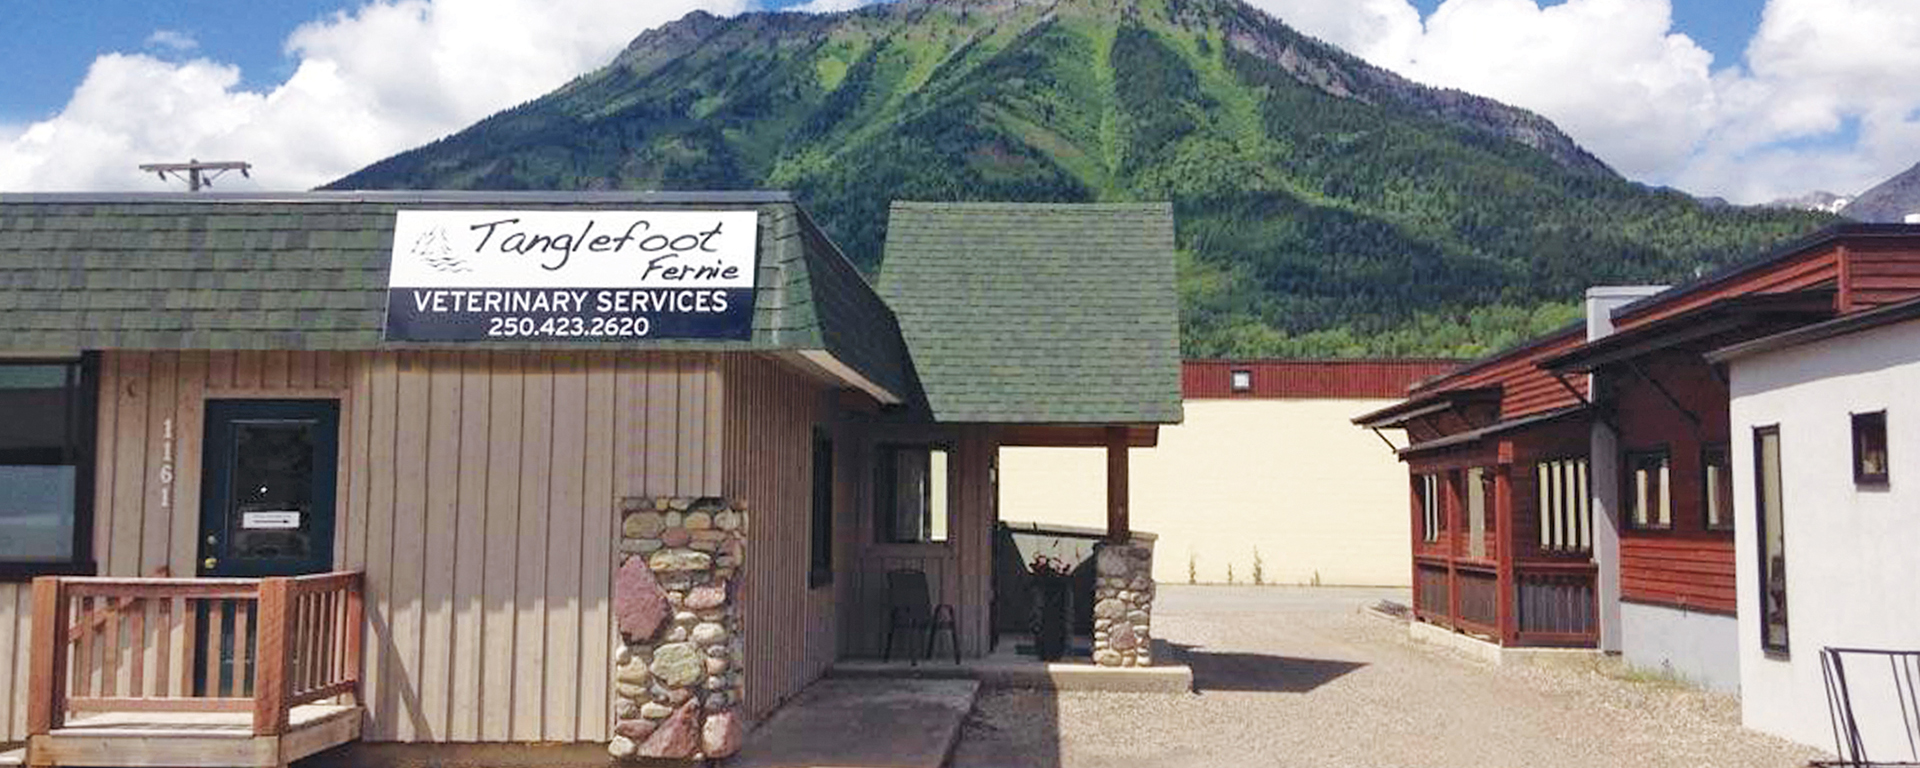 Exterior of the Tanglefoot Veterinary Services office in Fernie, BC 